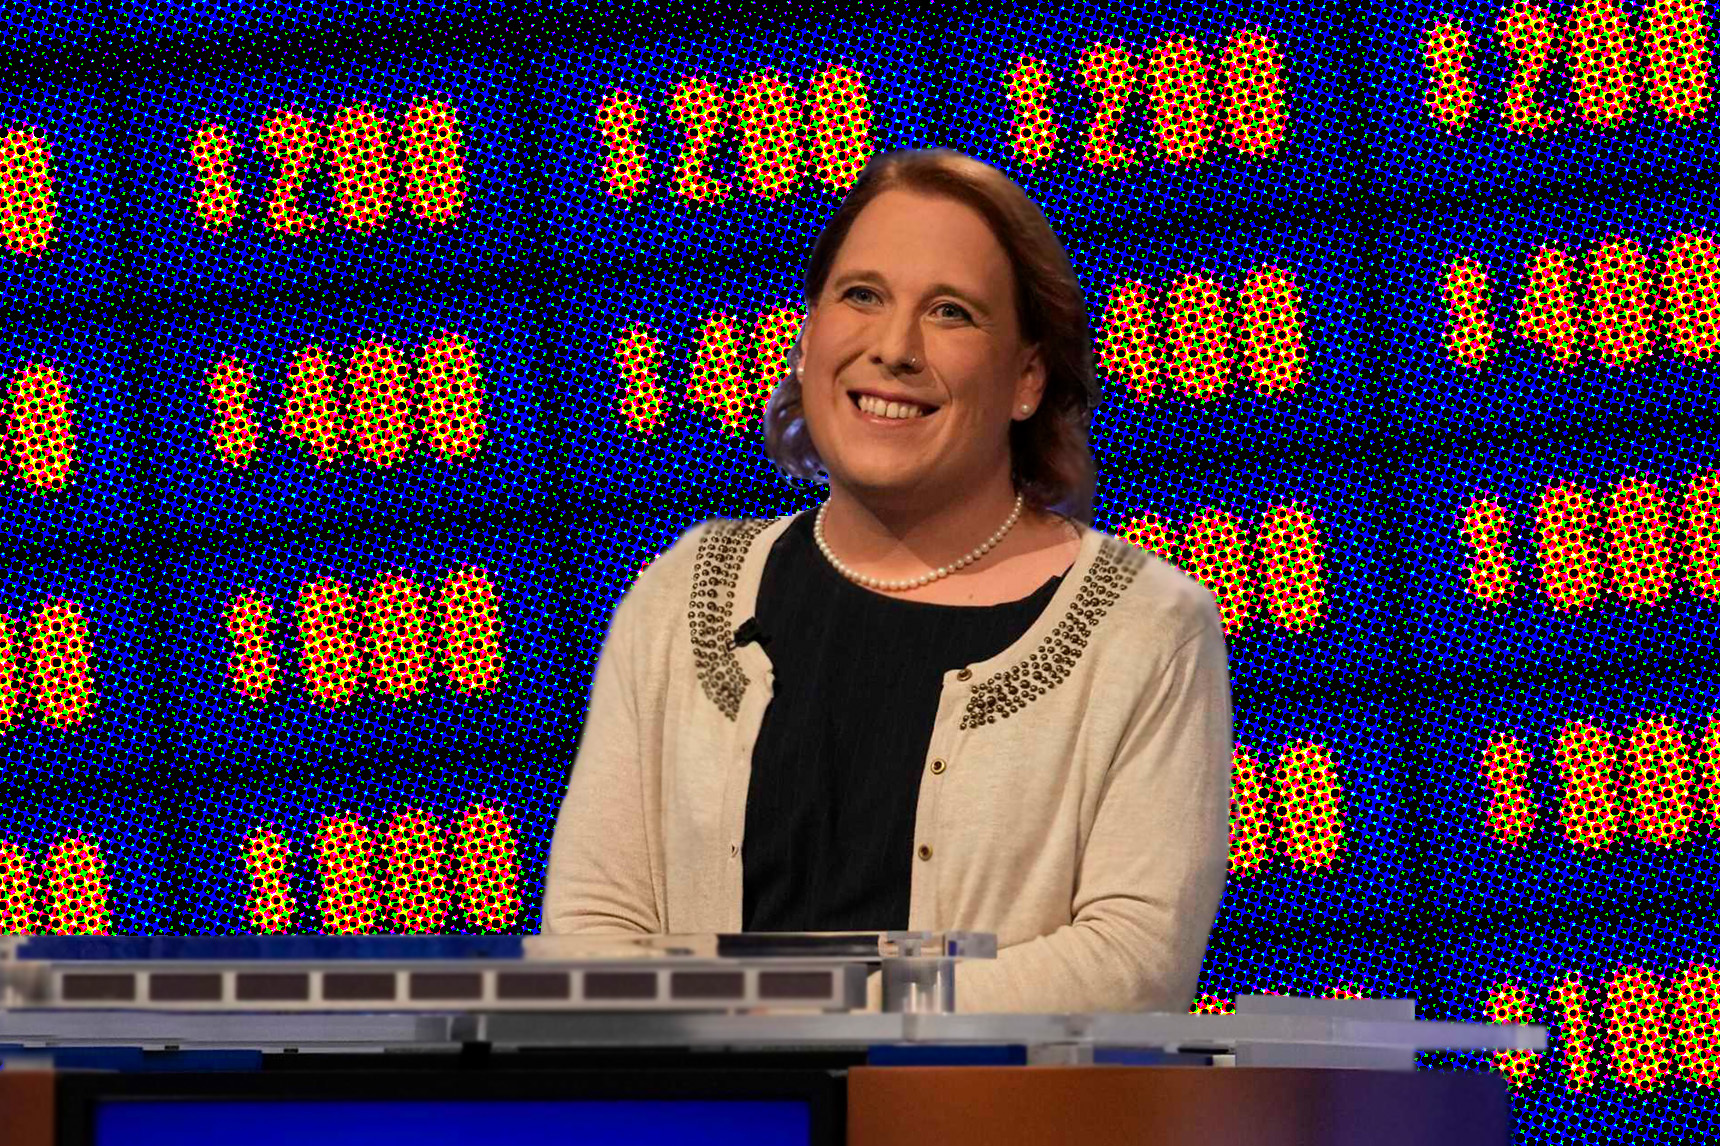 Does computer science make wonderful ‘Jeopardy!’ champs?